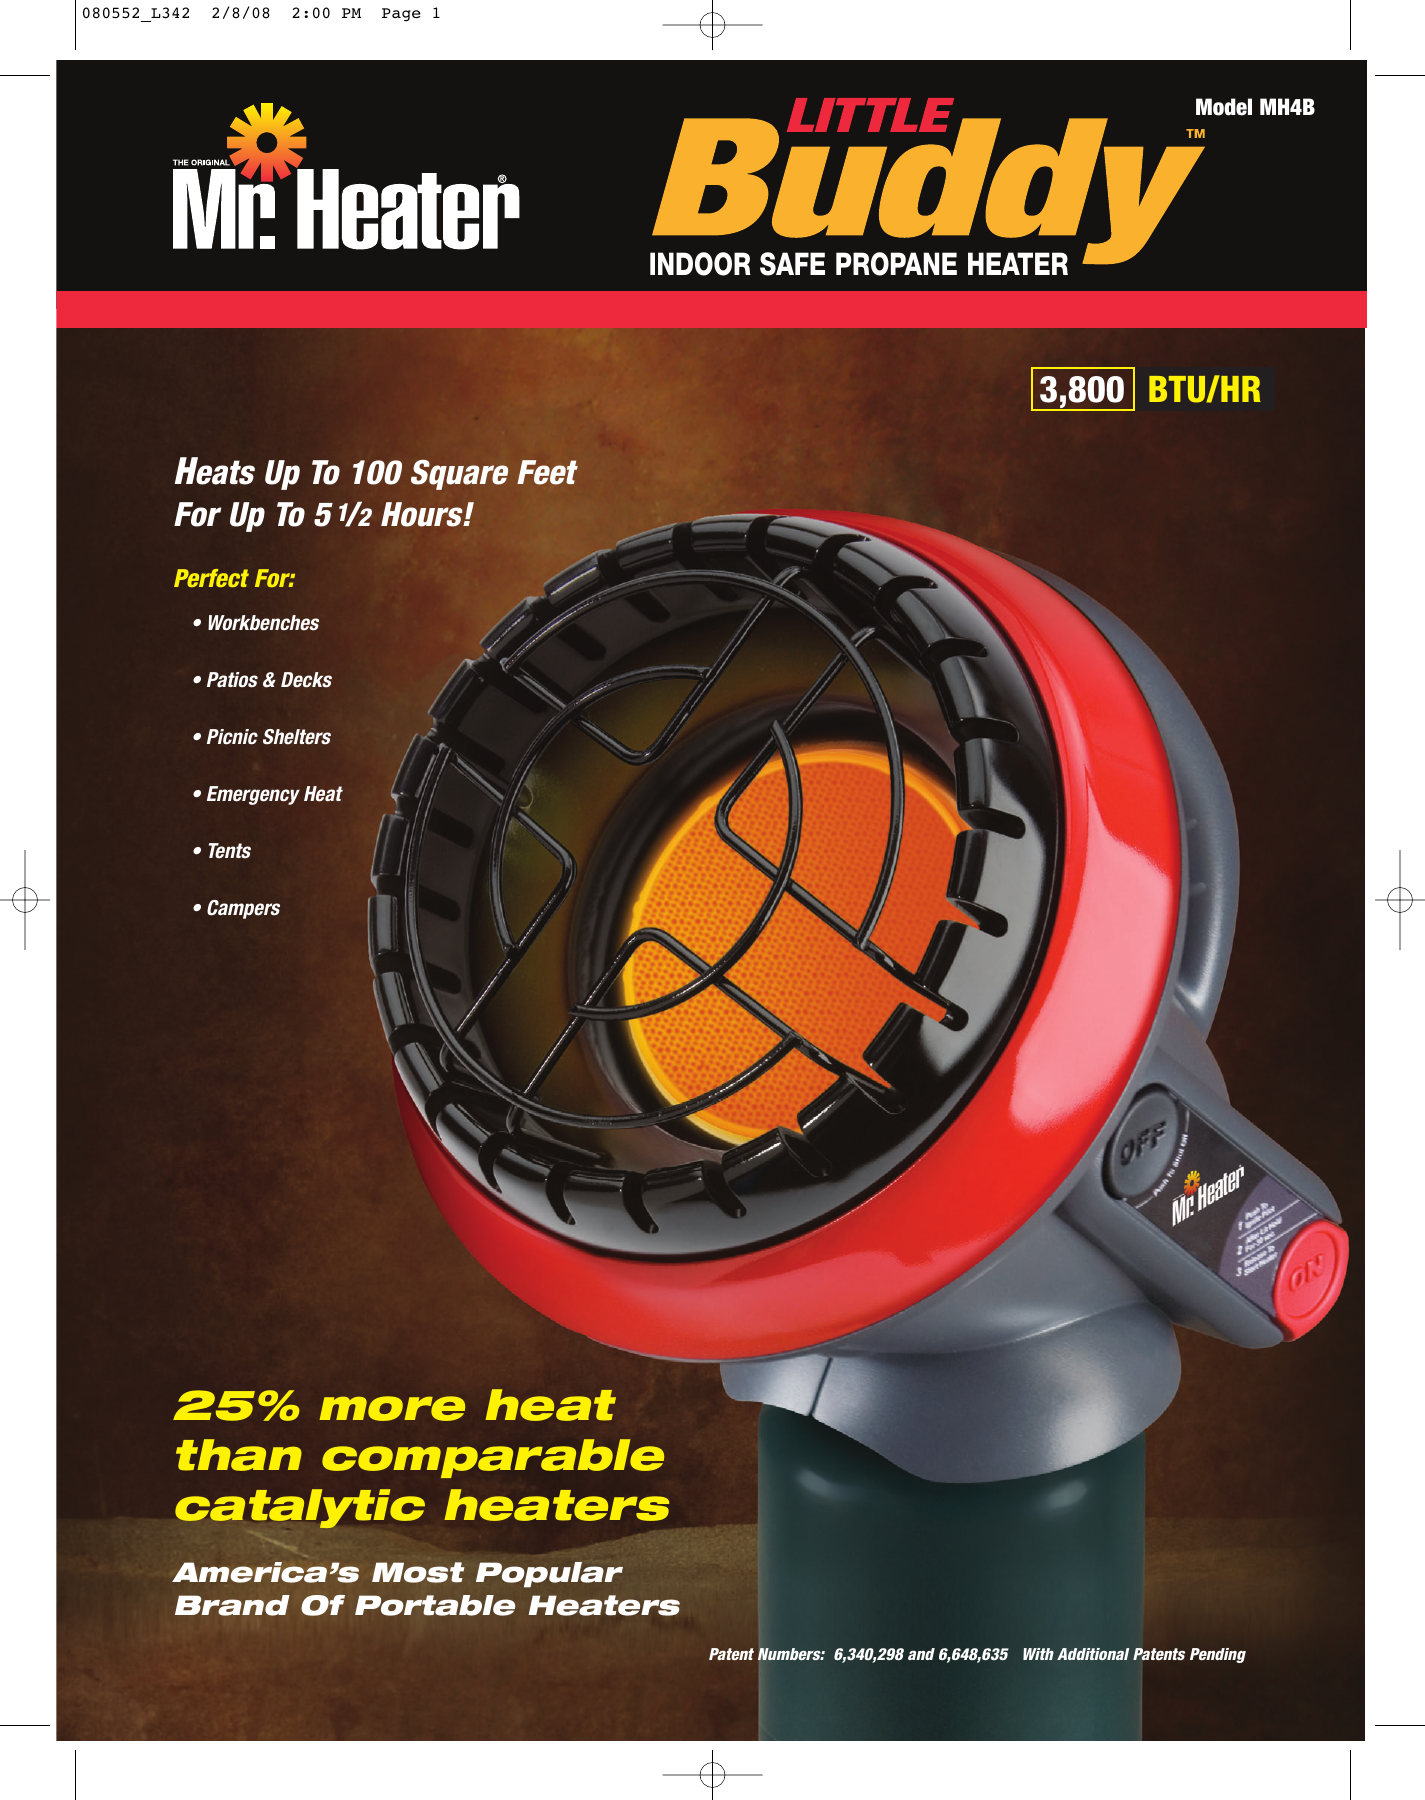 Page 1 of 2 - Mr-Heater Mr-Heater-Little-Buddy-Mh4B-Users-Manual- 080552_L342  Mr-heater-little-buddy-mh4b-users-manual